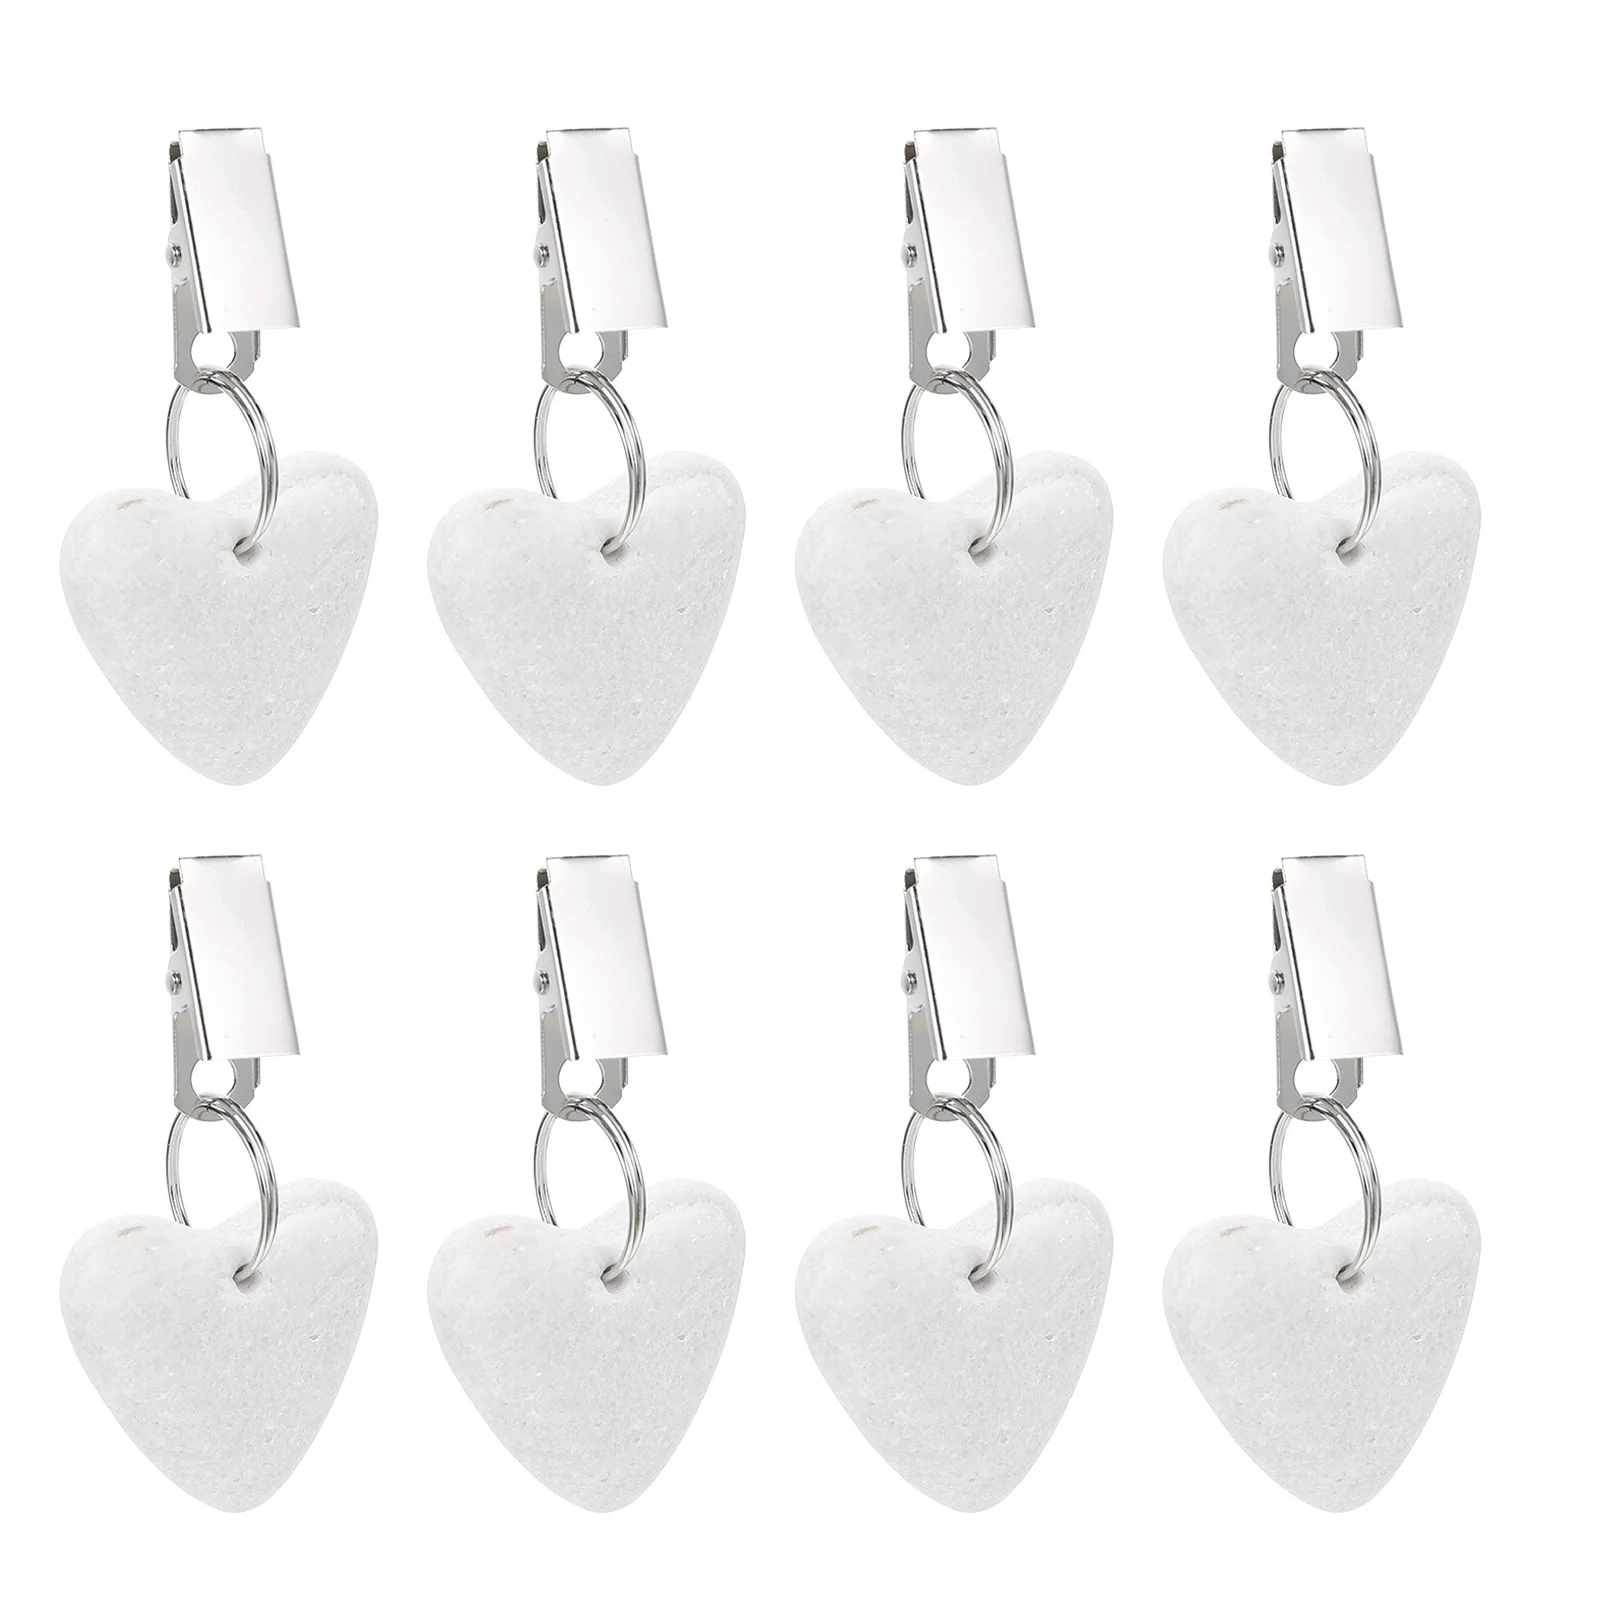 

Tablecloth Weights Table Weight Pendant Cover Clip Stone Clips Marble Picnic Clothdecorative Hangers Heart Holders Curtain Heavy